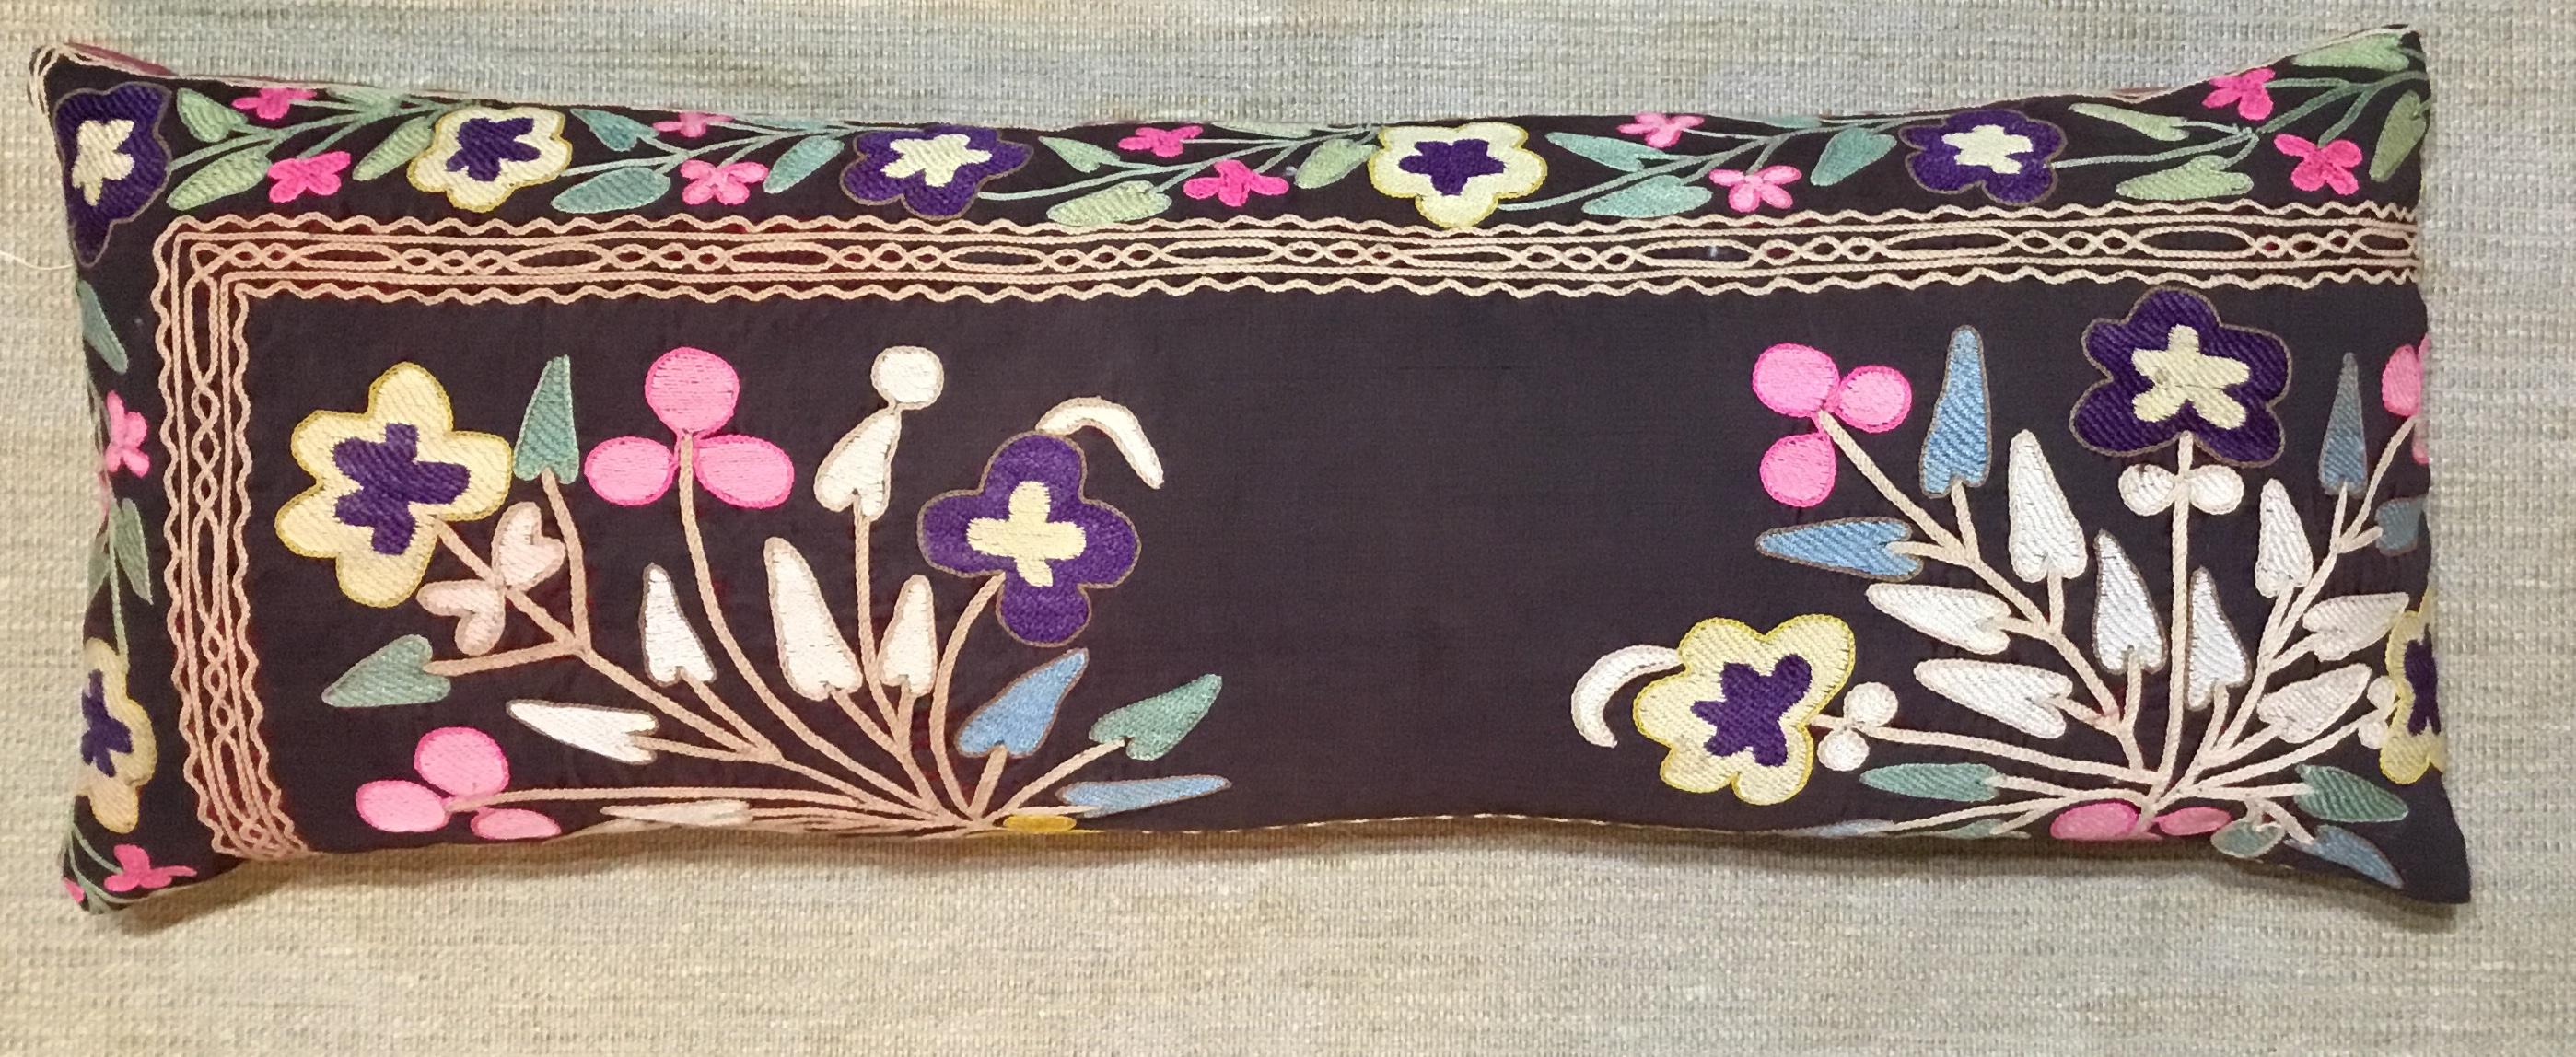 Exceptional pillow made of antique hand embroidery Suzani fragment, beautiful colors of vine and floral motifs all embroidered on a antique oxidized wine color velvet. Quality backing, frash inserts. Great for room decoration.
                   